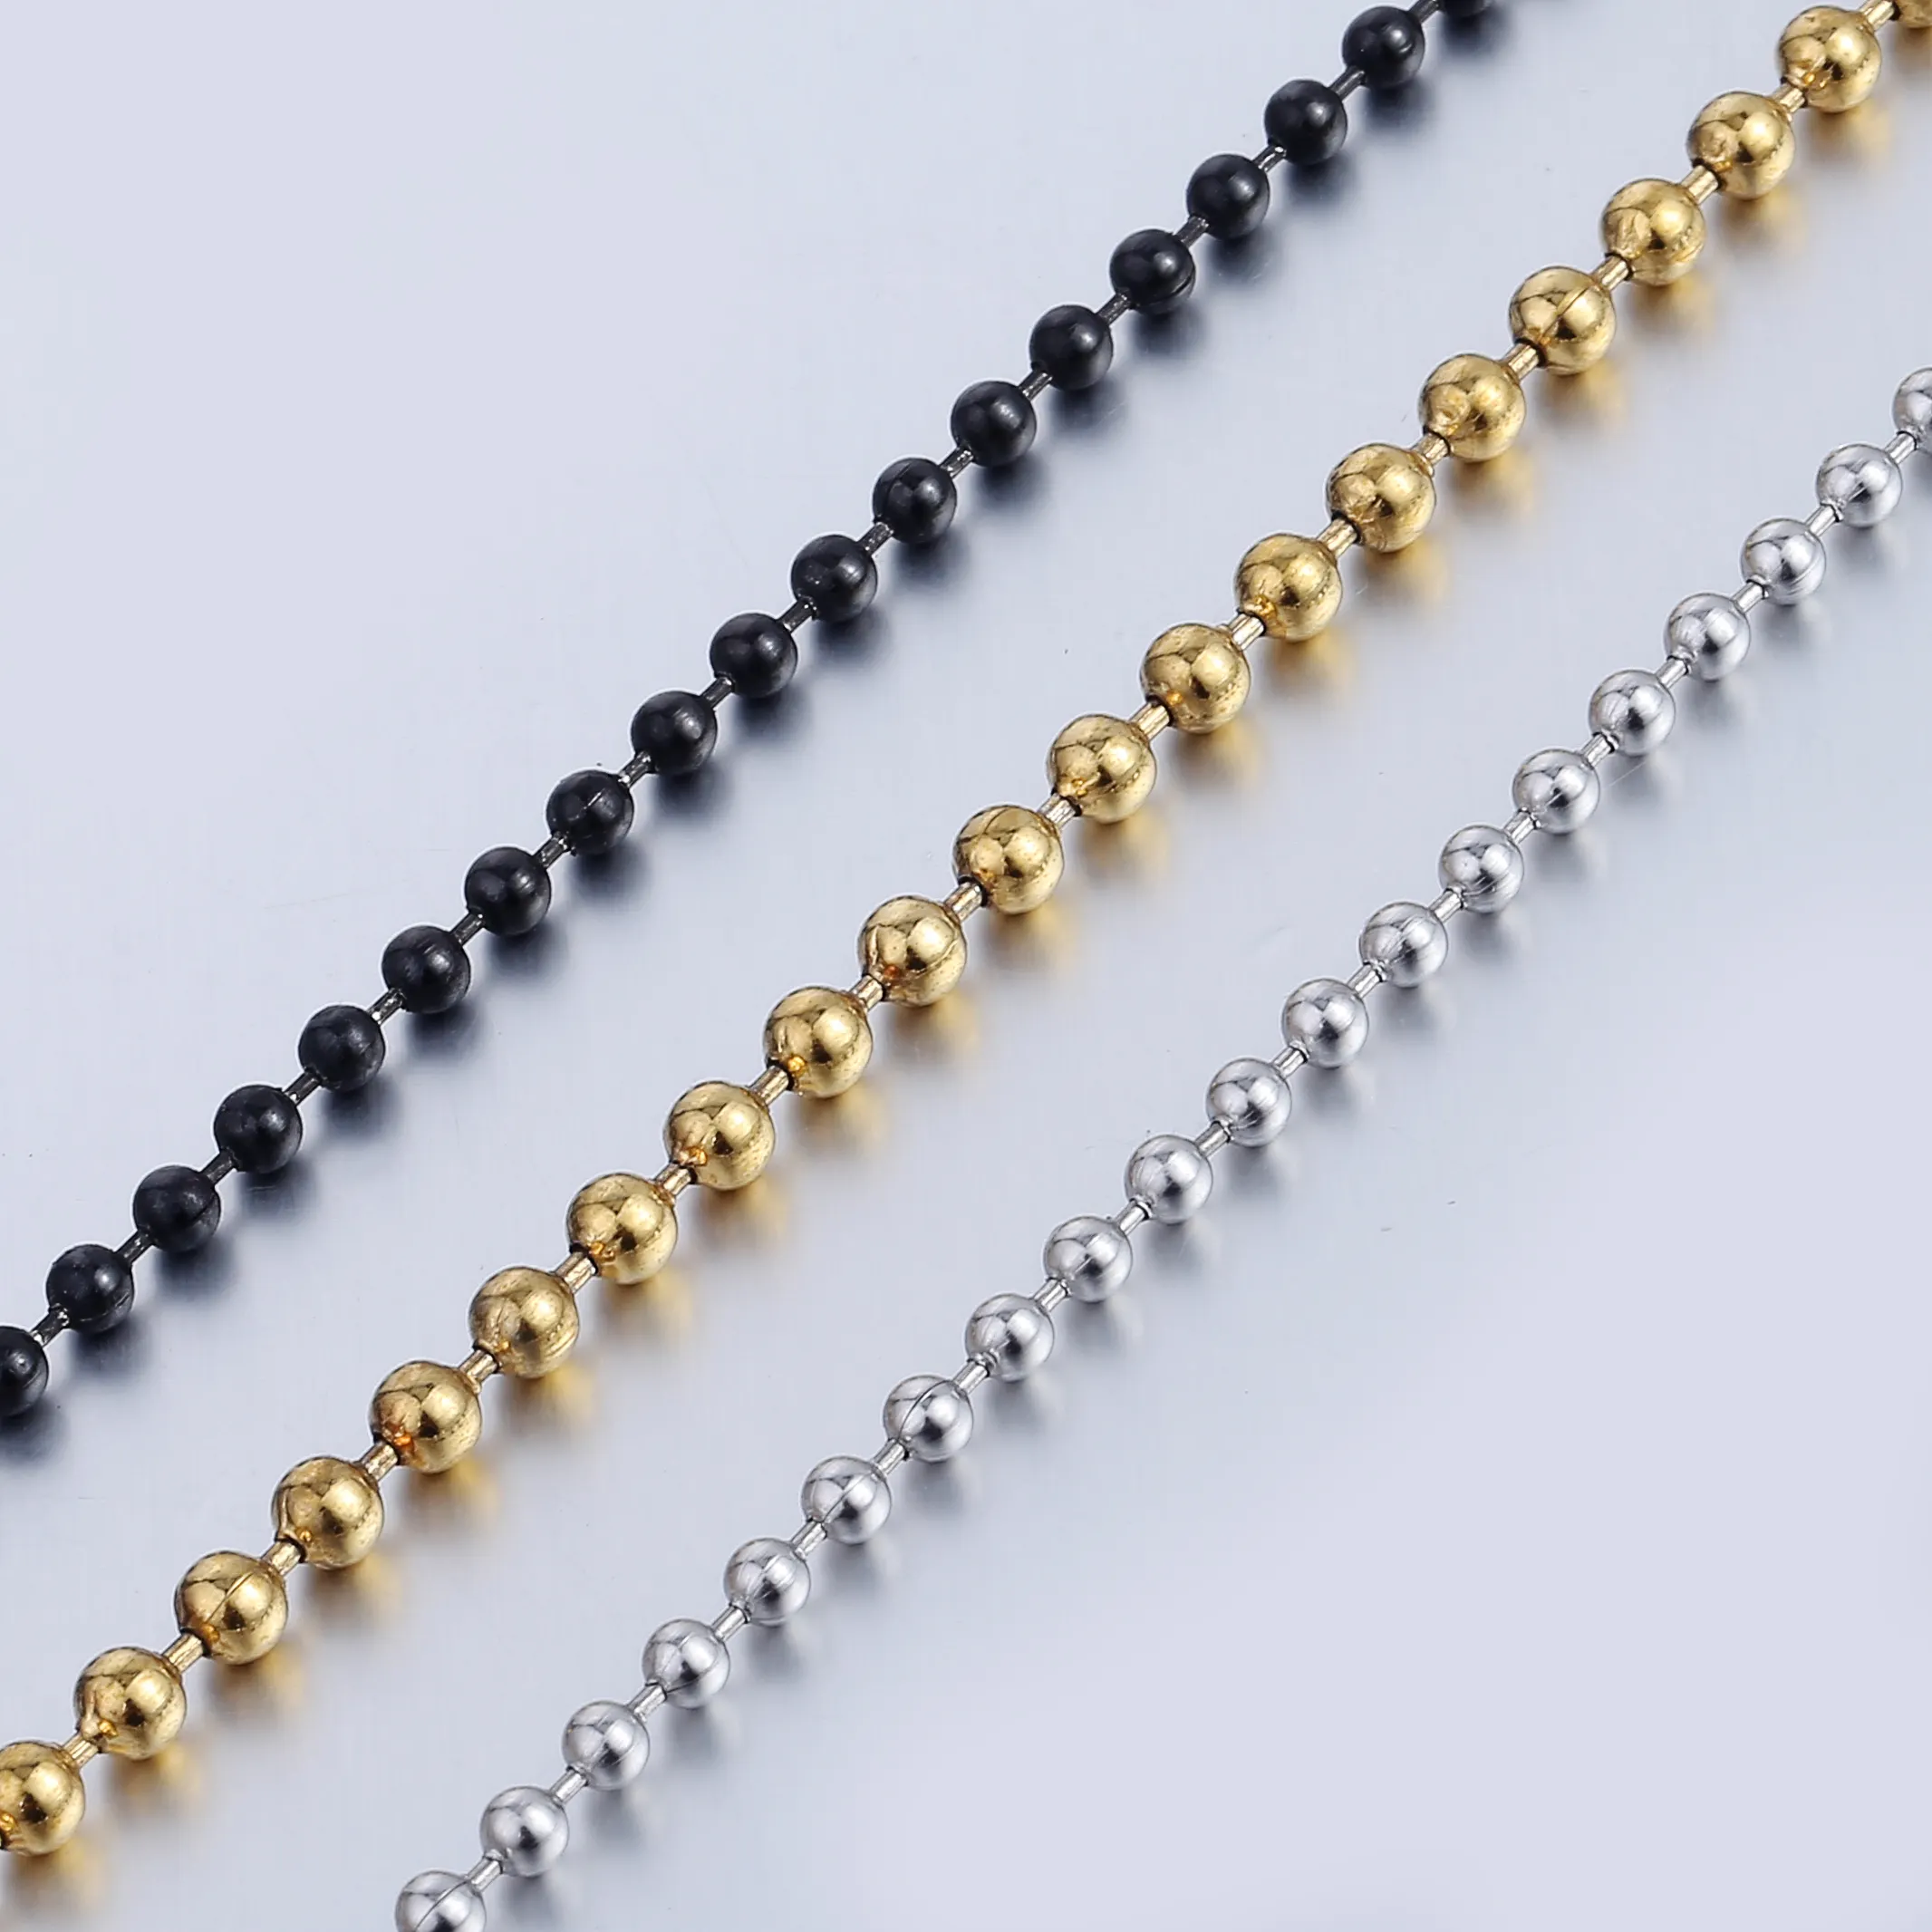 Hot Selling Stainless Steel 18K Gold Round Bead Ball Chain Necklace Jewelry For DIY Jewelry